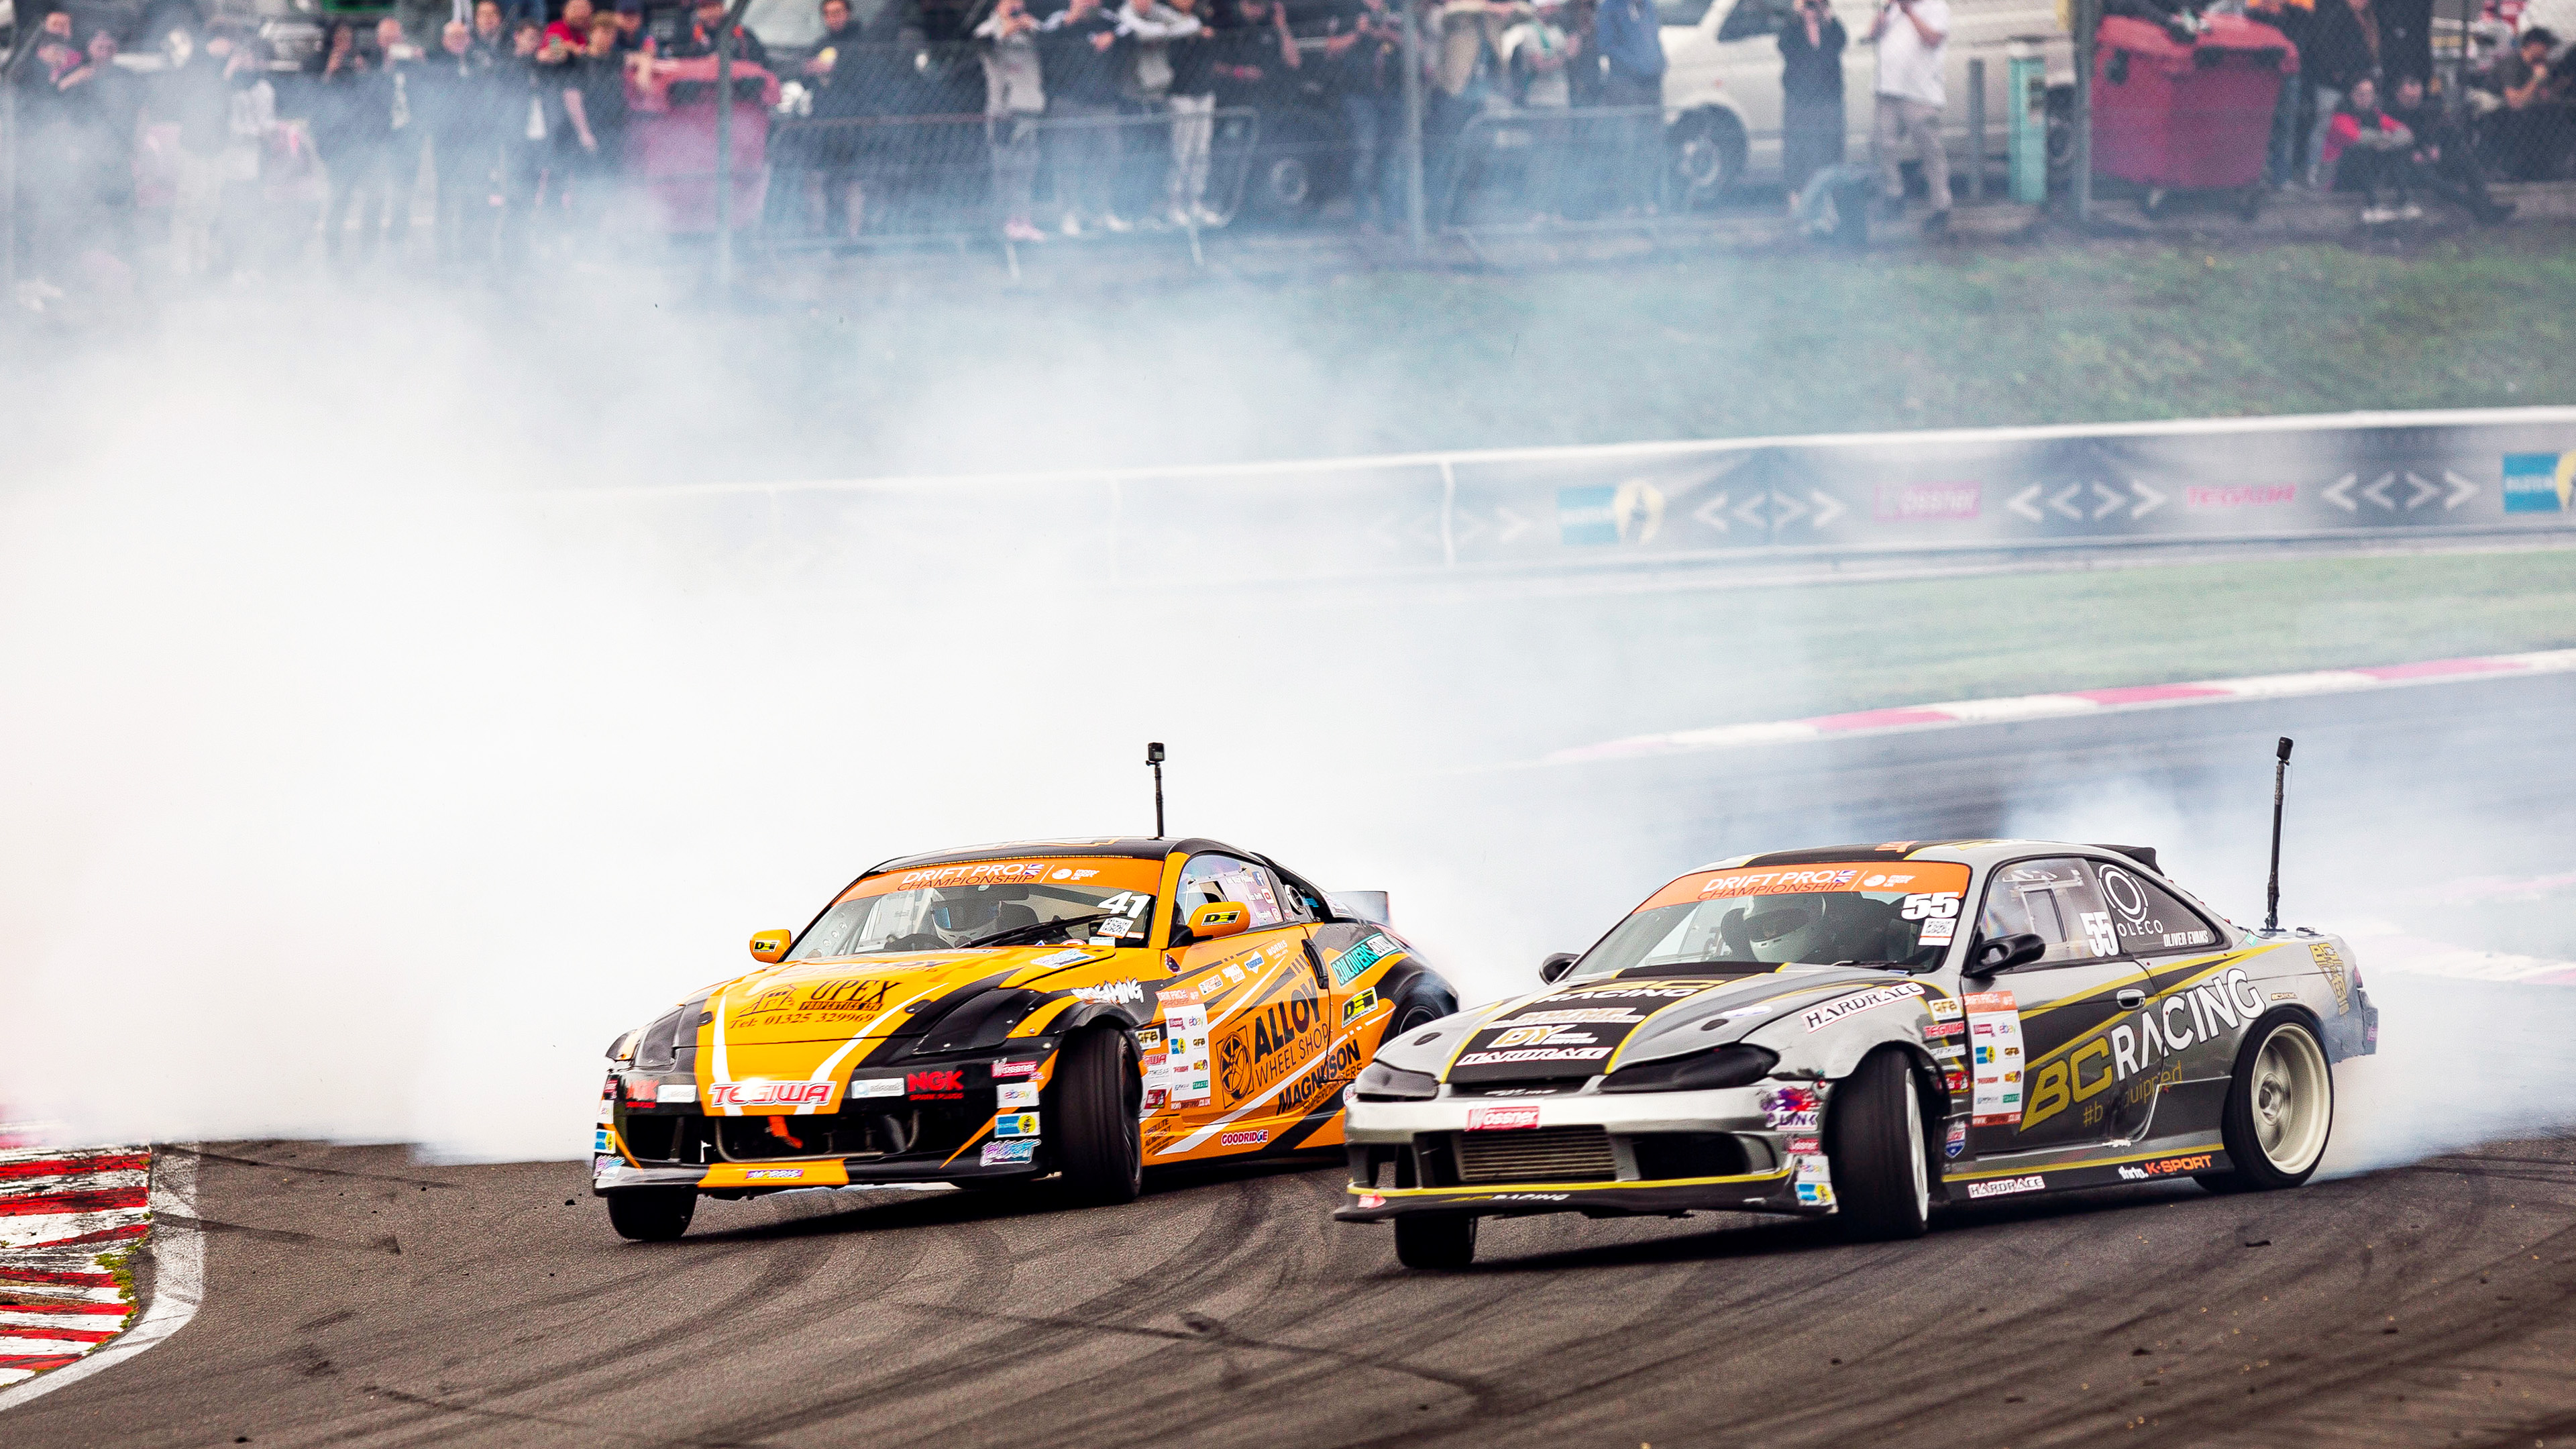 For the Love of Cars: Auto Racing in Japan